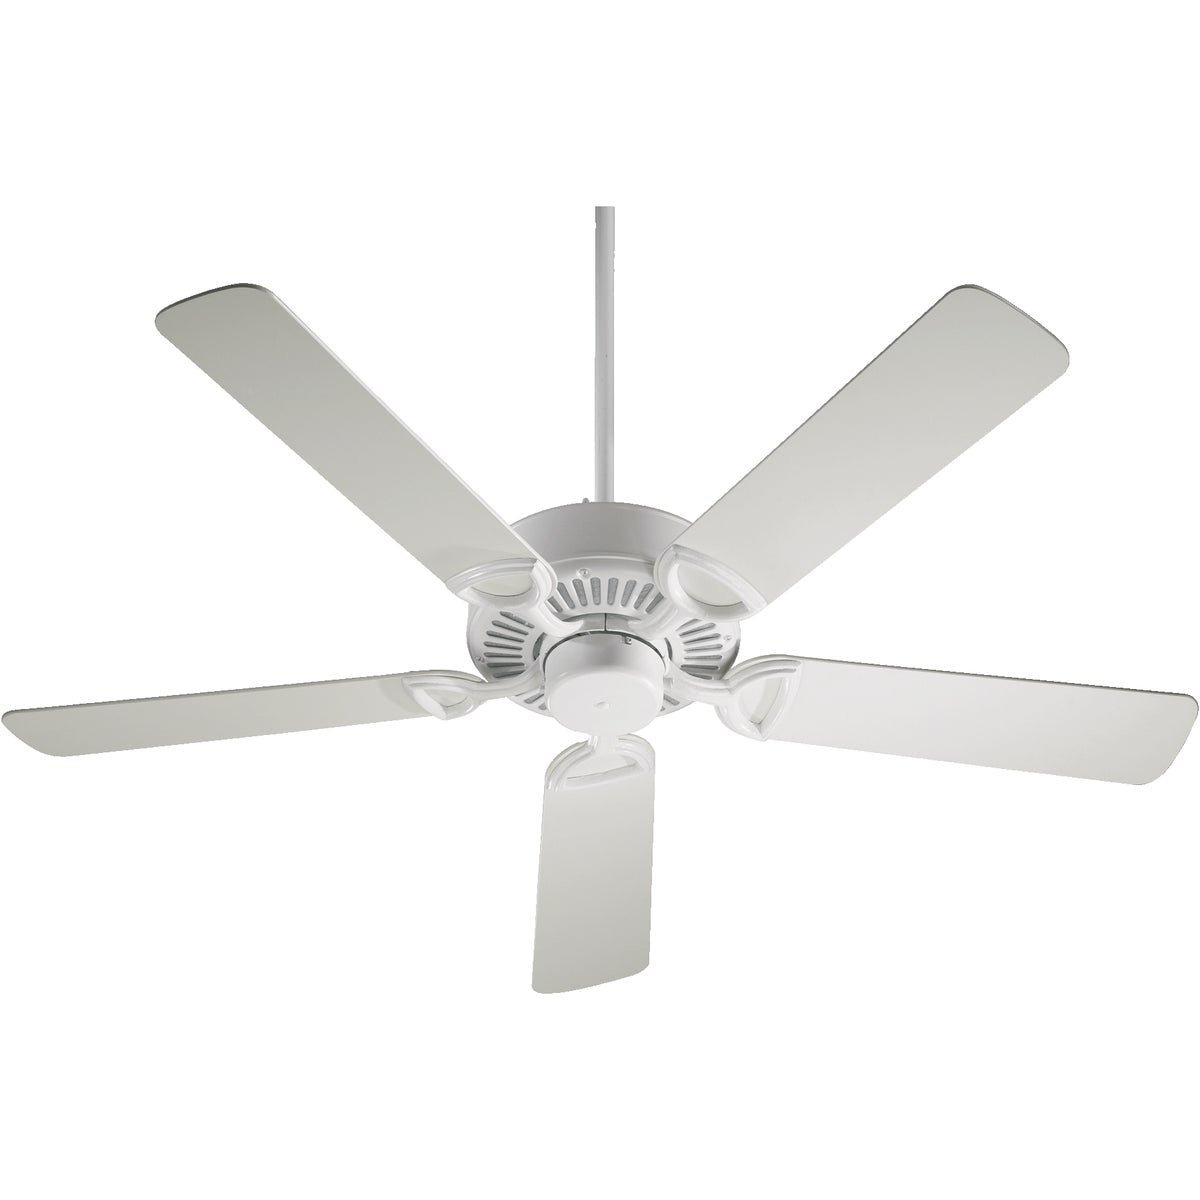 Traditional Ceiling Fan with 5 Rounded-Edged Blades, UL Listed. Complements wooden items in your rooms. Limited Lifetime Warranty.